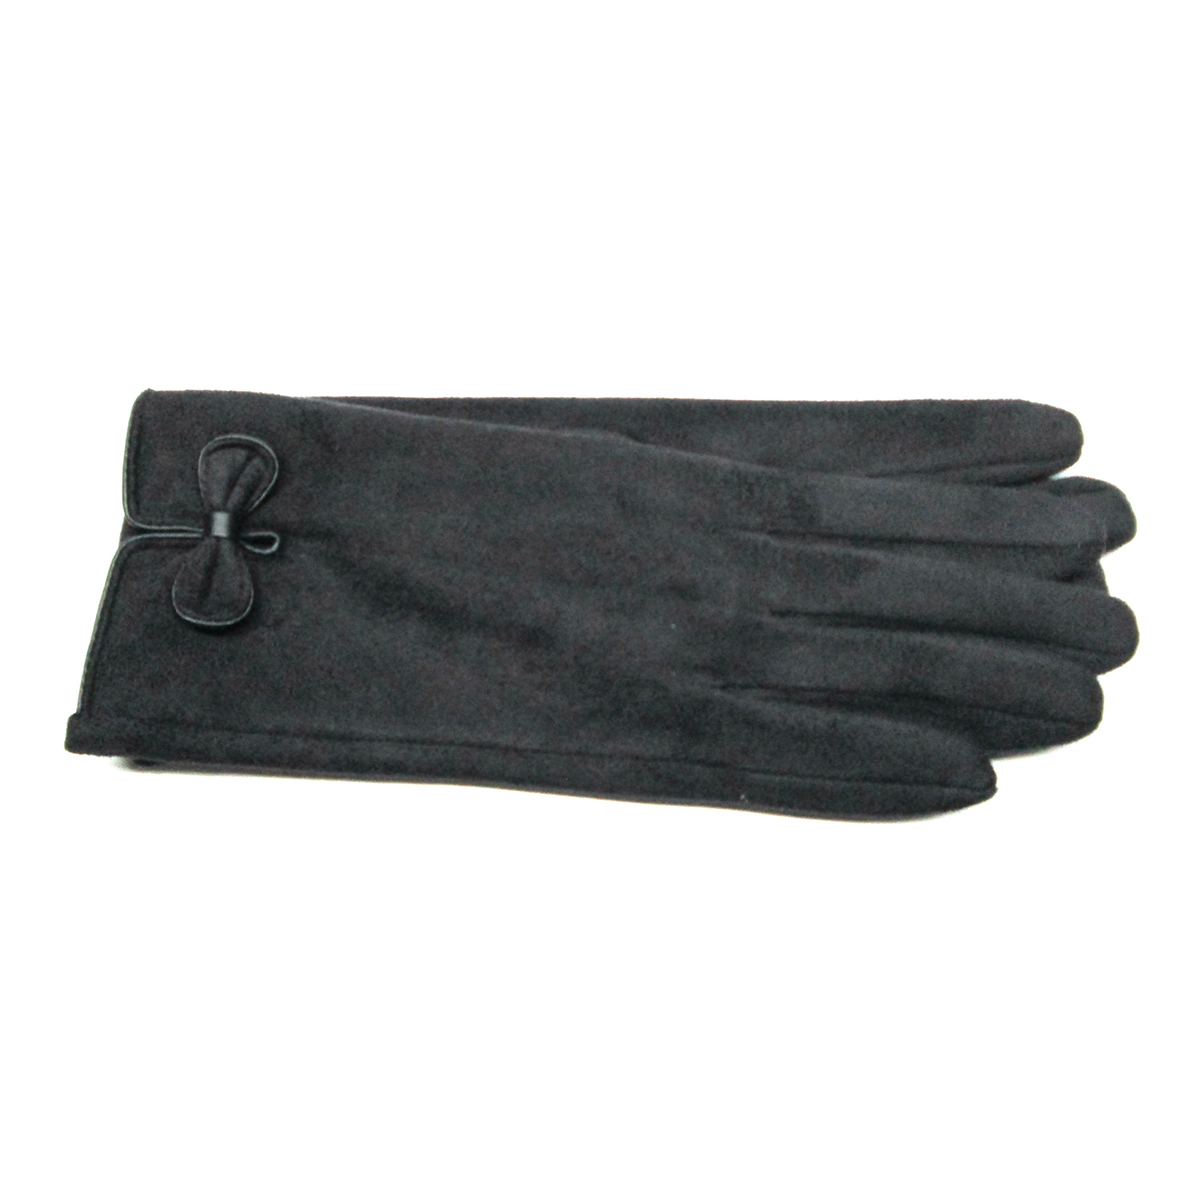 Womens Adrienne Vittadini Faux Suede Gloves With Piping Trim